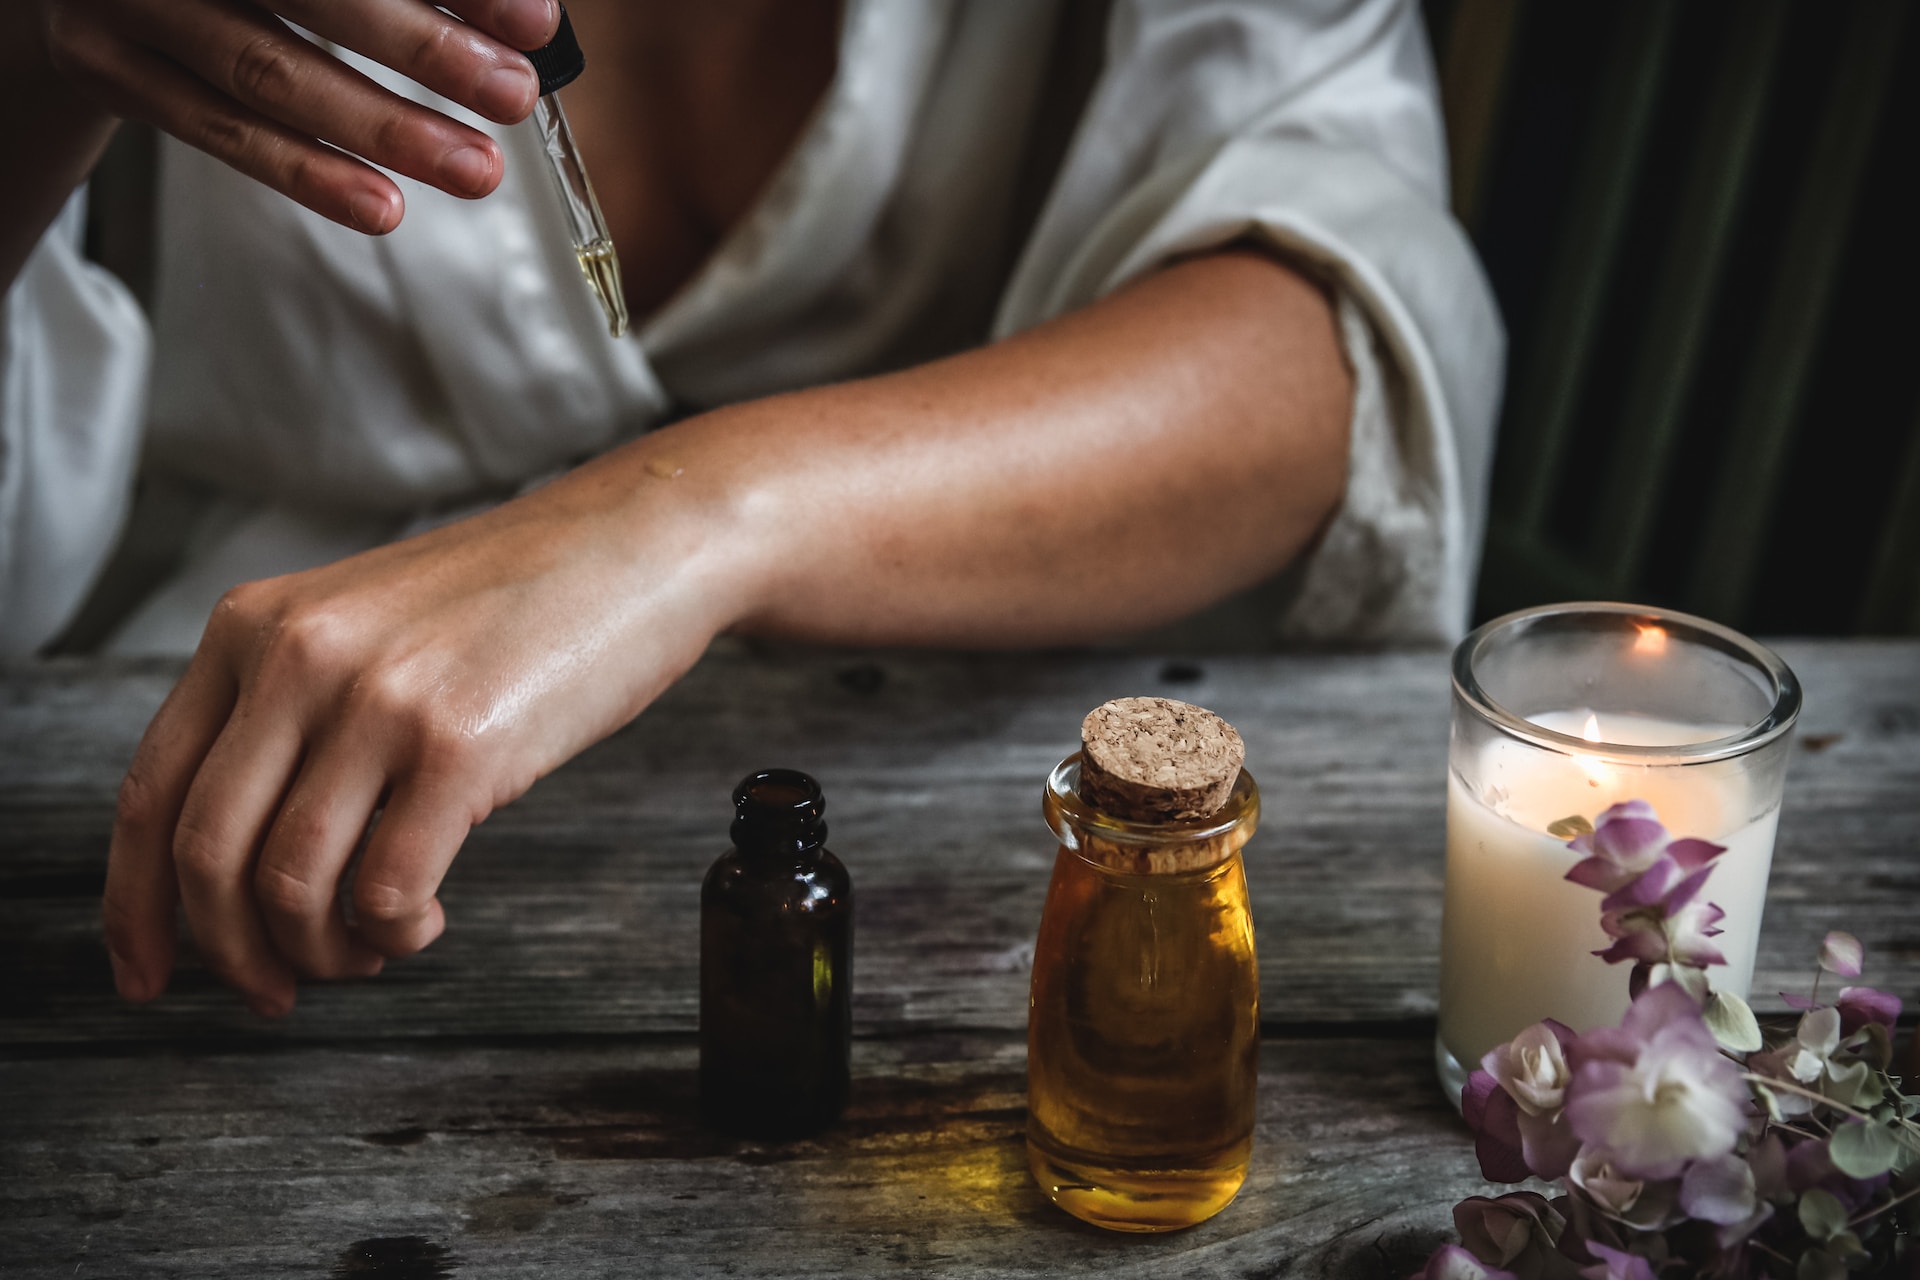 A woman using a dropper to add essential oil to the skin of her left arm sitting at a wooden table with a lit candle and flowers